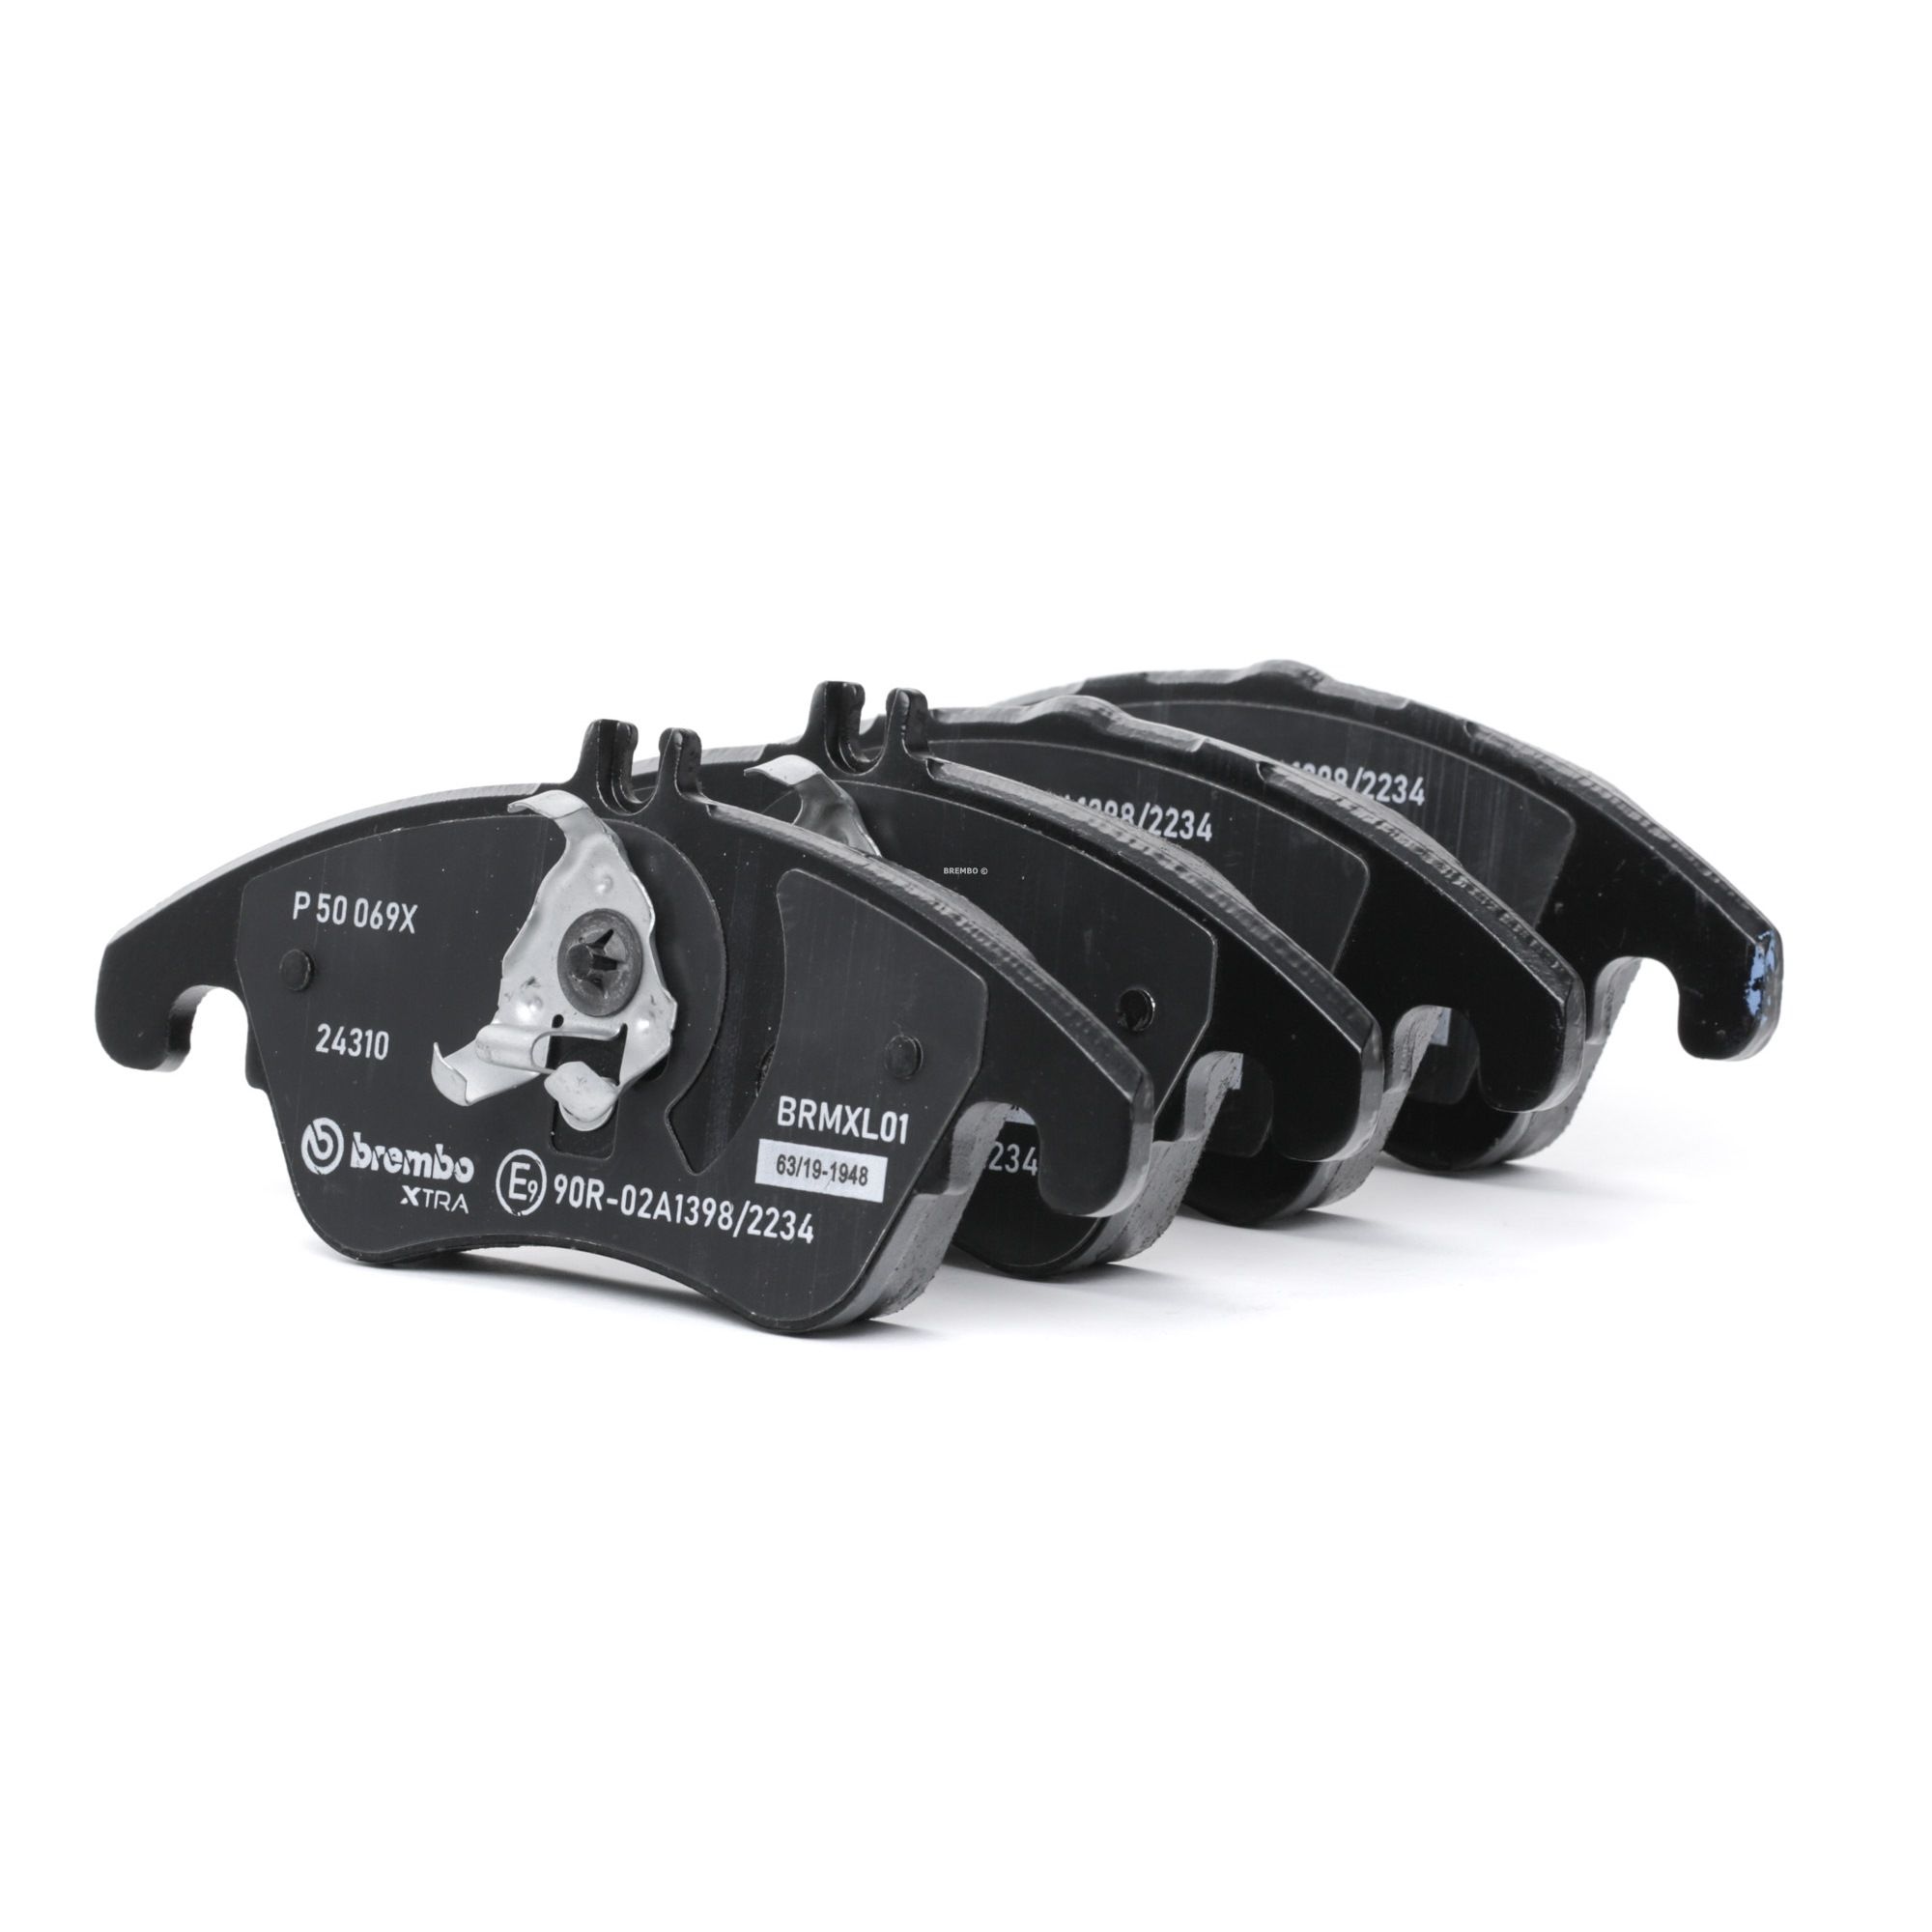 BREMBO P 50 069X Brake pad set prepared for wear indicator, with brake caliper screws, with piston clip, with anti-squeak plate, without accessories